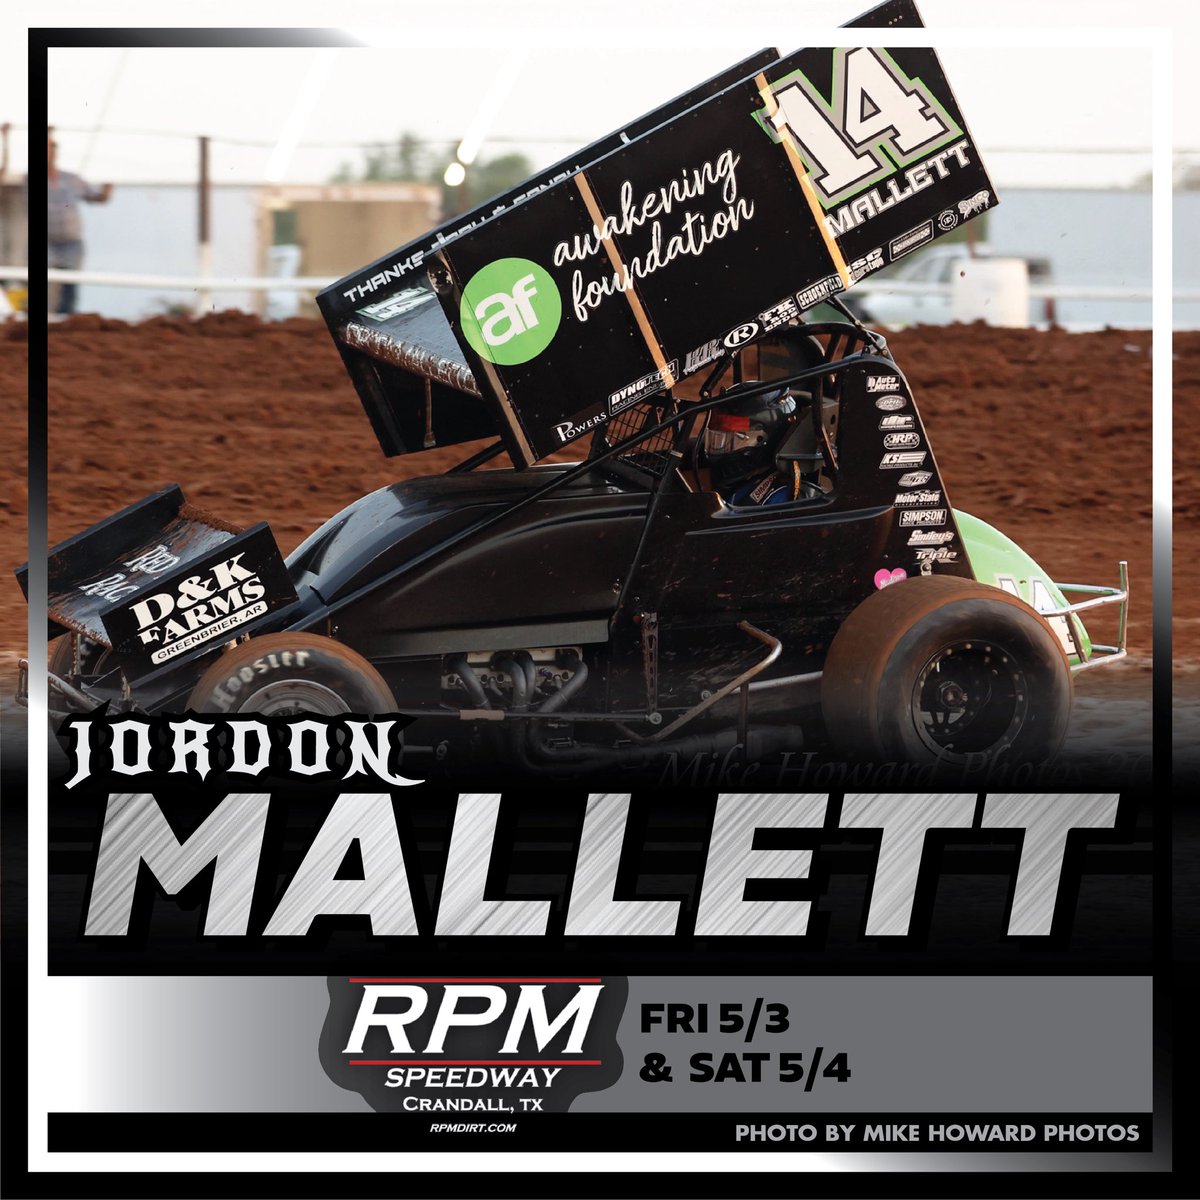 Another @ASCSRacing National Tour weekend is on tap for @jmmotorsports14! #TeamILP